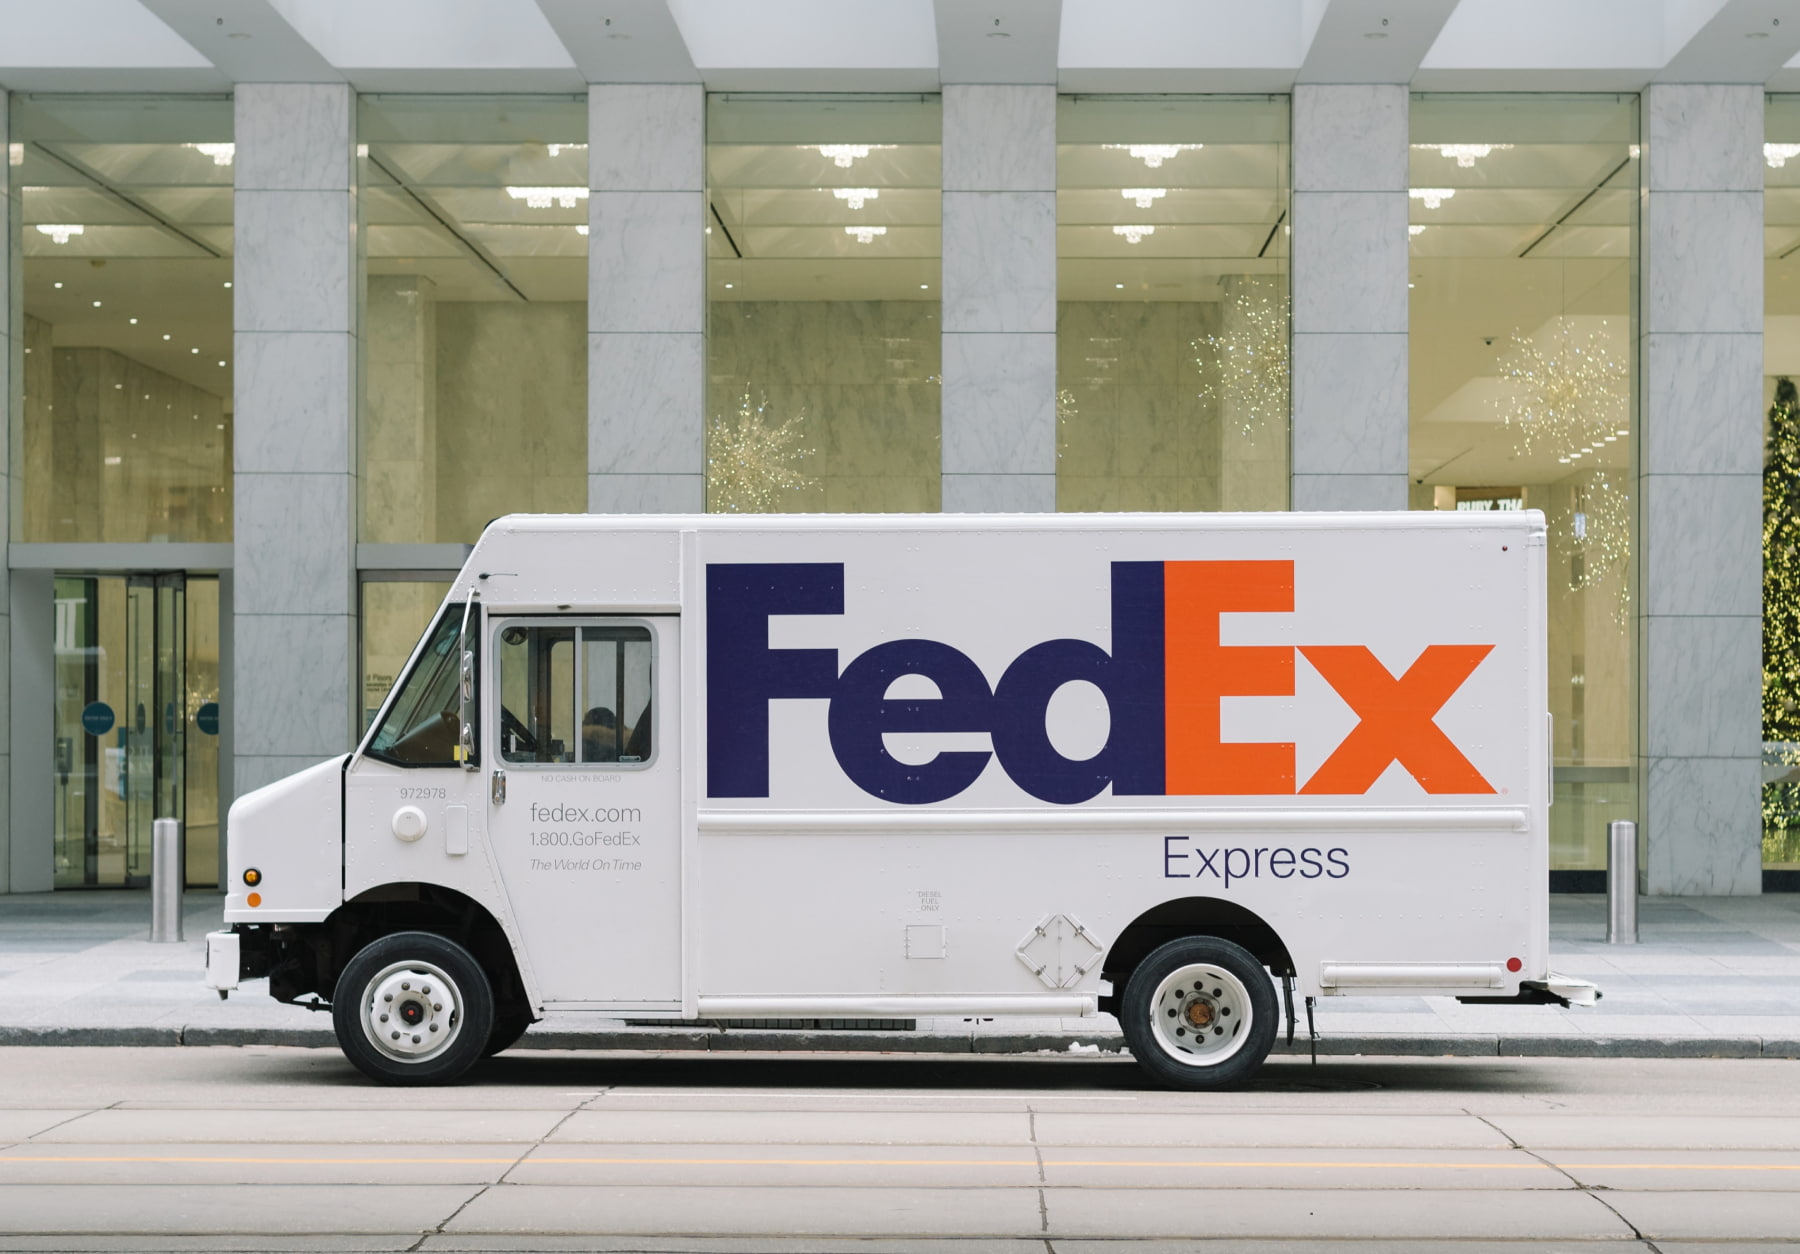 Fed-ex delivery truck in front of building.